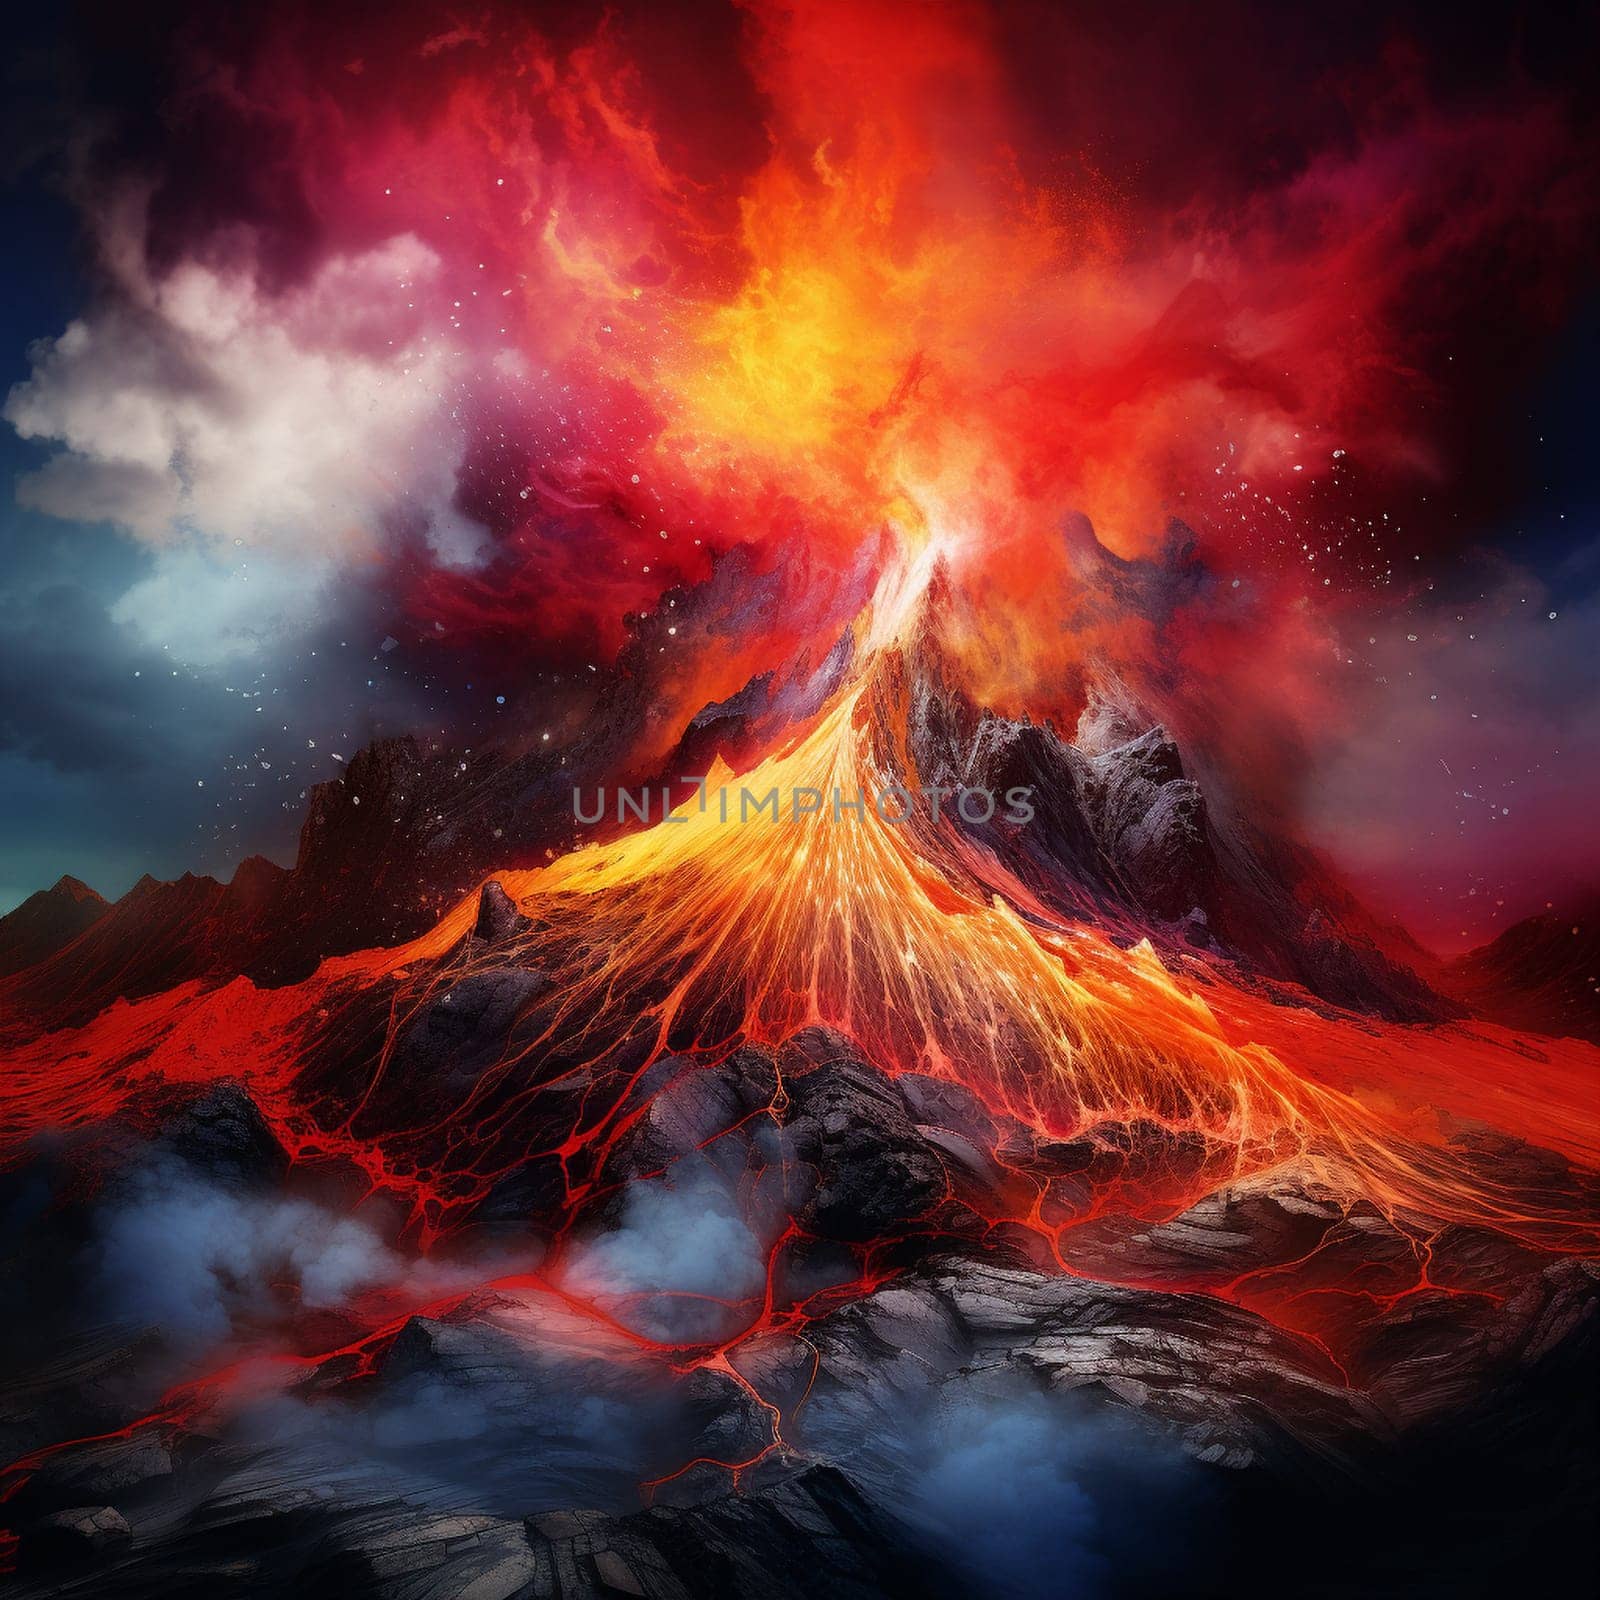 Prepare to be mesmerized by Fiery Maelstrom, an image that depicts a captivating volcanic eruption with elements of surrealism and vibrant colors. This scene evokes a powerful sense of chaos and primordial beauty, immersing viewers in the intense heat and swirling magma. The billowing smoke adds to the atmosphere, creating an otherworldly feel that is both awe-inspiring and captivating. Fiery Maelstrom is a top choice for microstock sites seeking dynamic and mesmerizing visuals that elicit strong emotions.